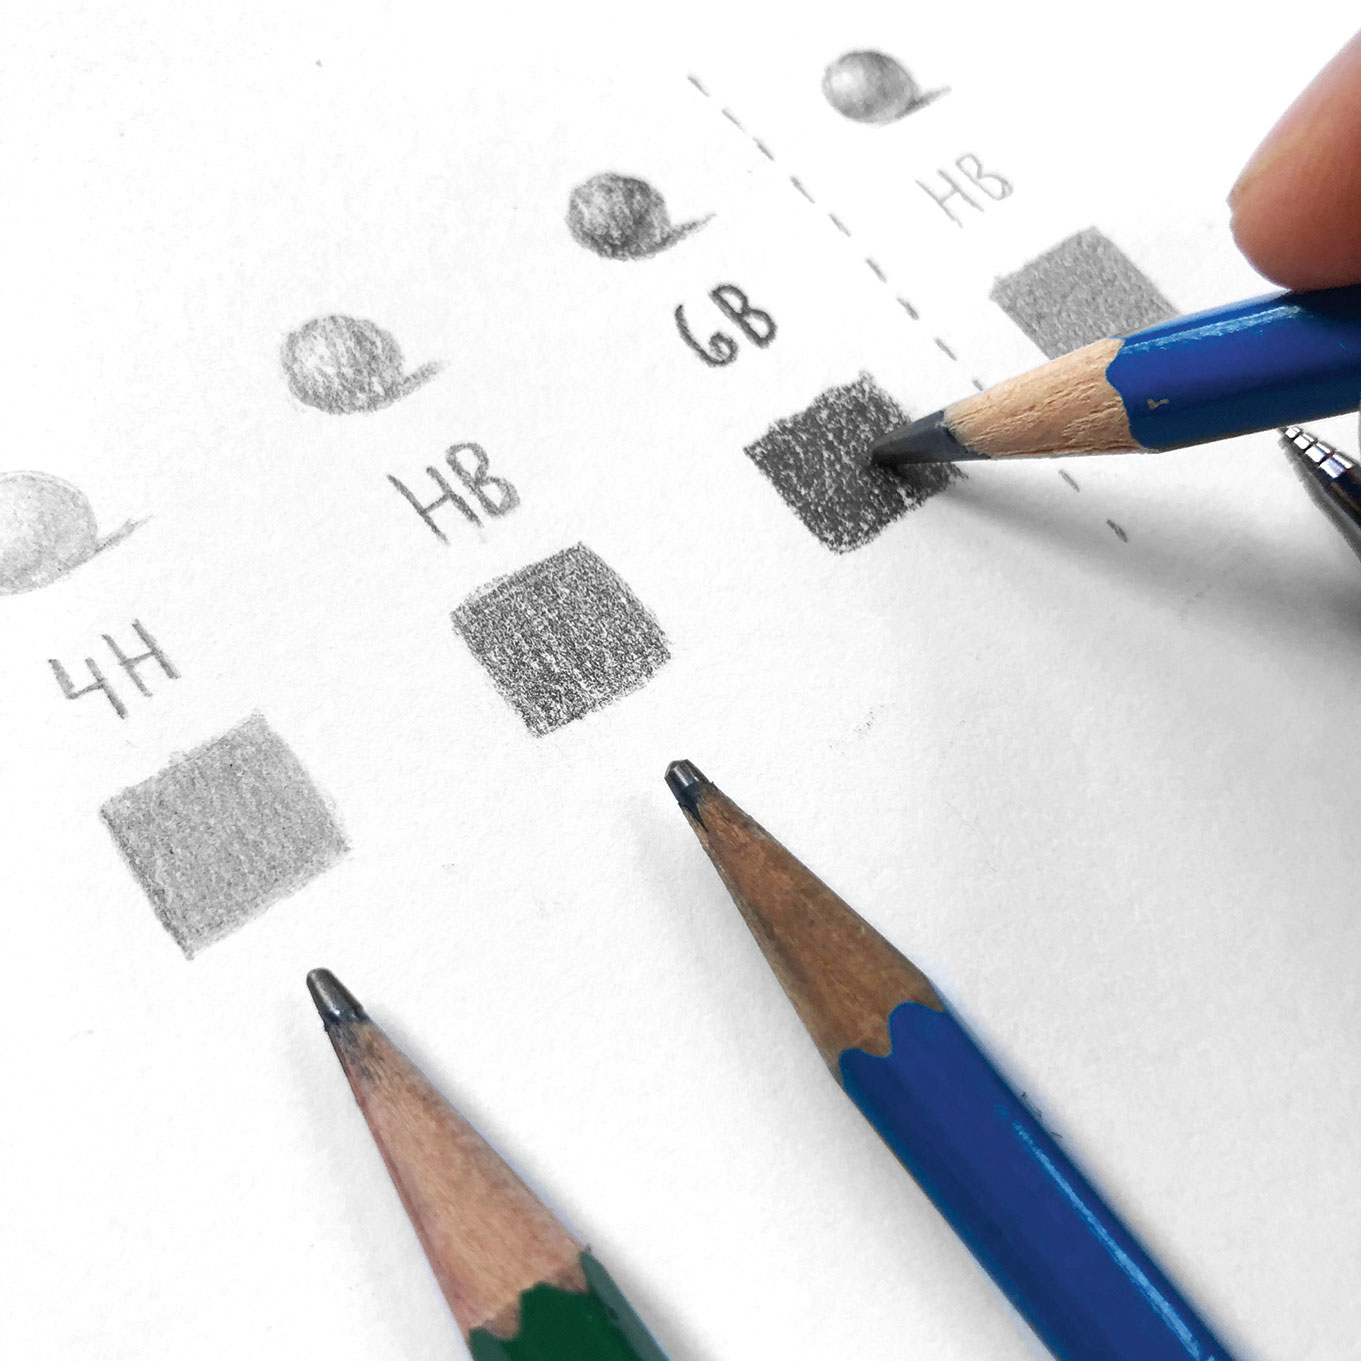 Pencil shading techniques 5 expert tips Creative content for